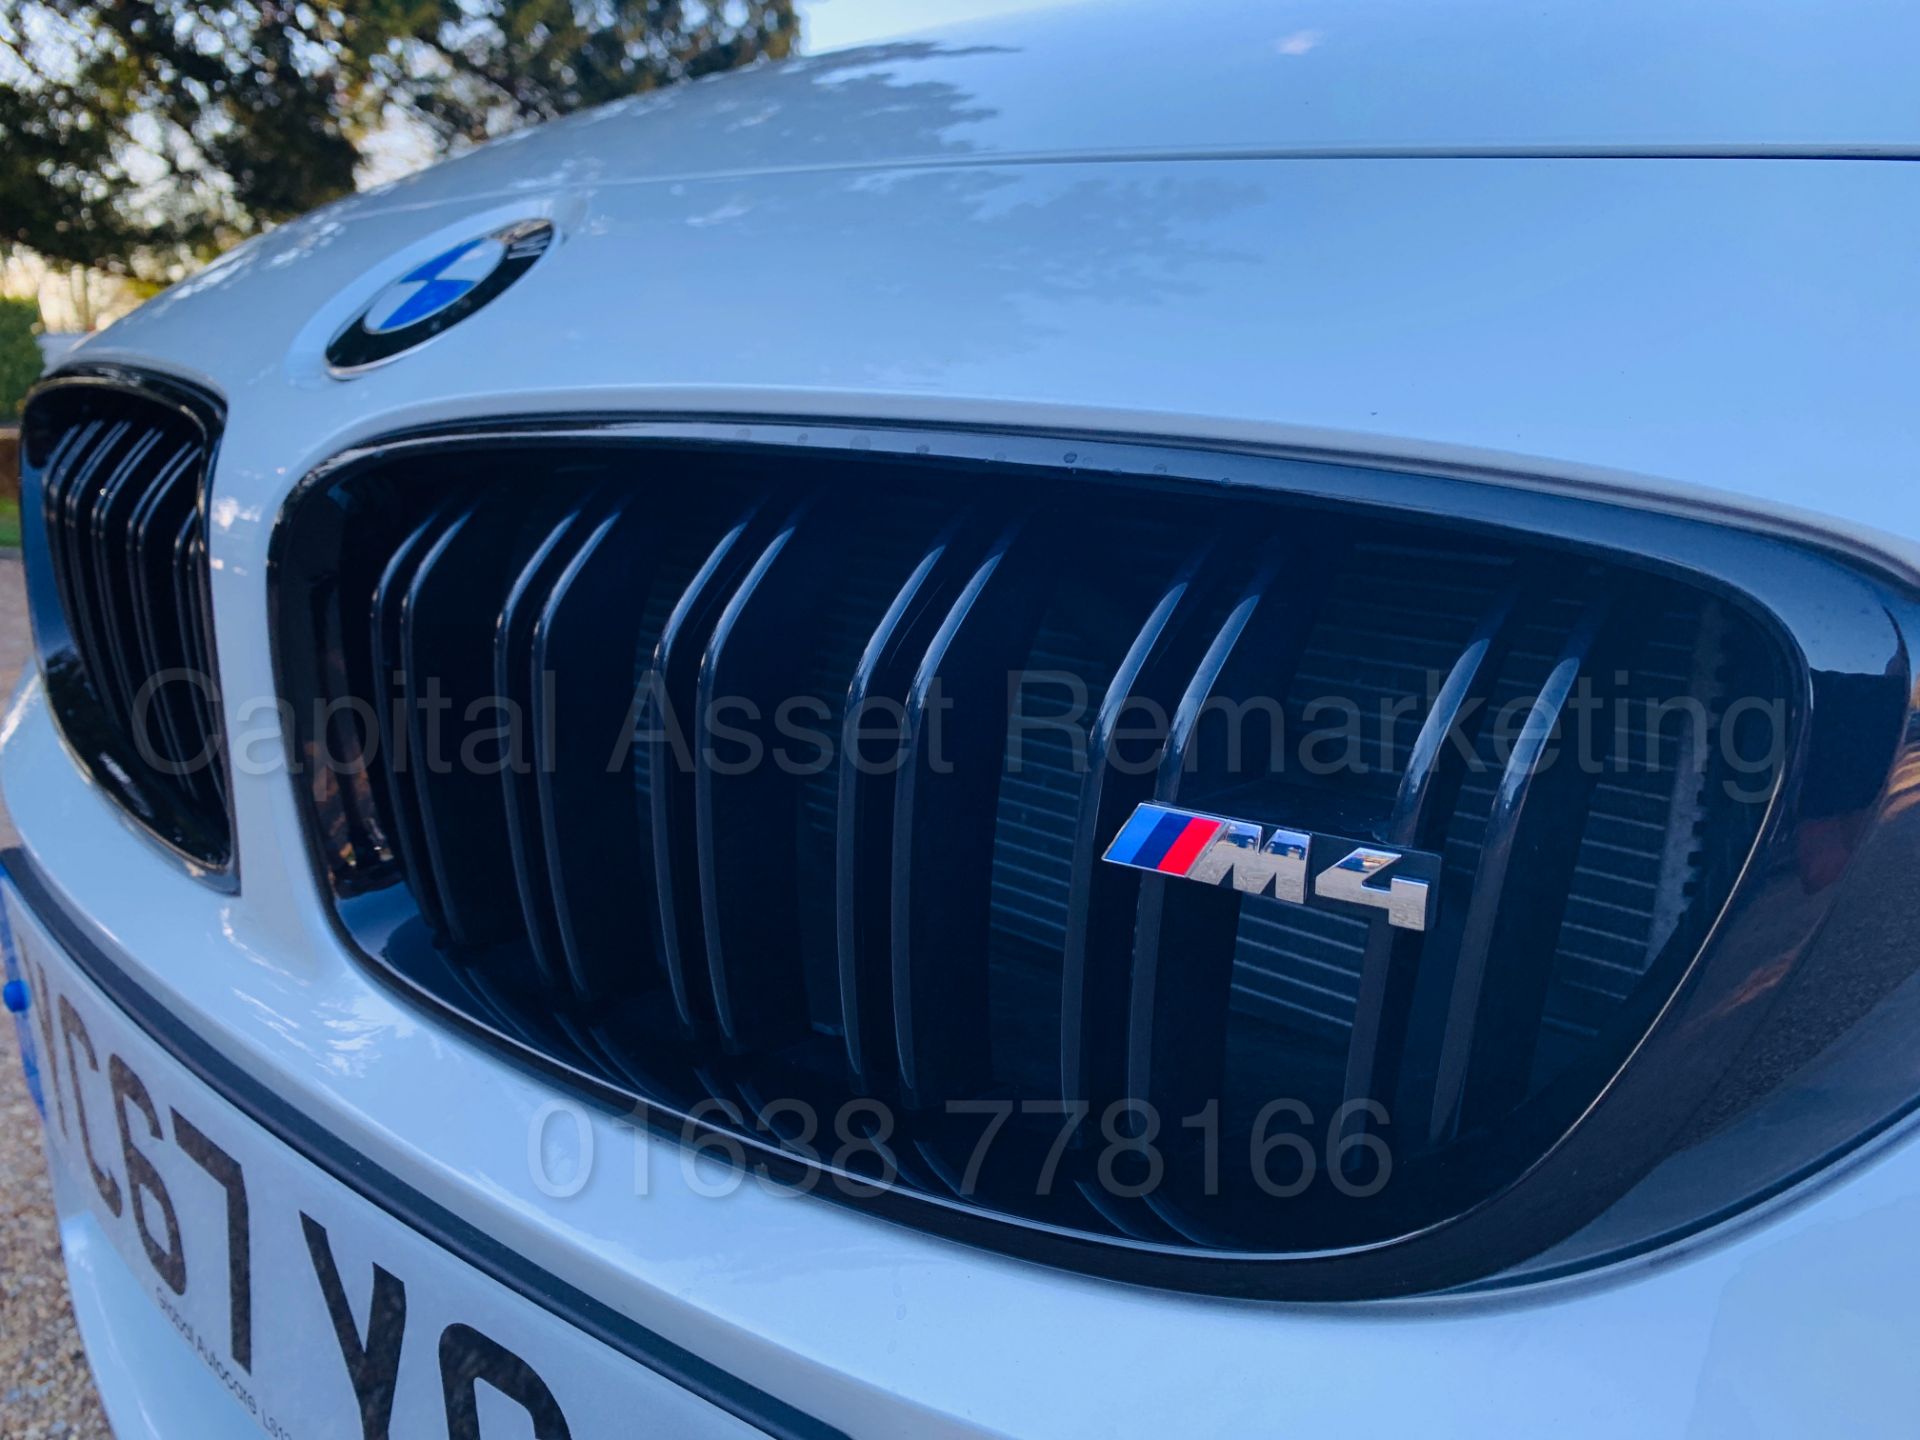 ON SALE BMW M4 CONVERTIBLE *COMPETITION PACKAGE* (2018 MODEL) '431 BHP - M DCT AUTO' WOW!!!!! - Image 34 of 89